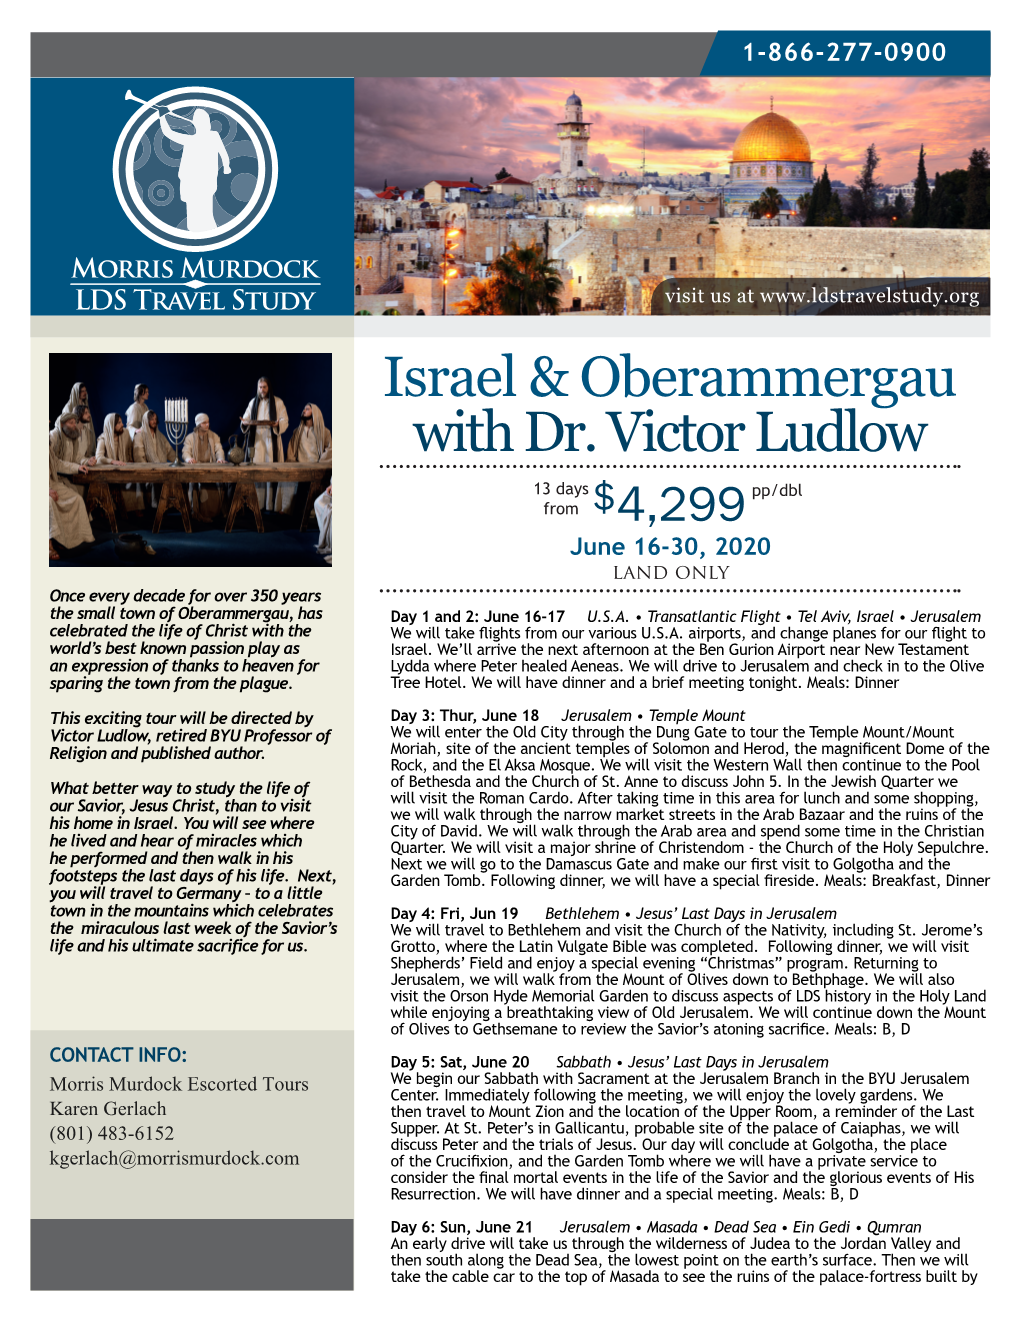 Israel & Oberammergau with Dr. Victor Ludlow